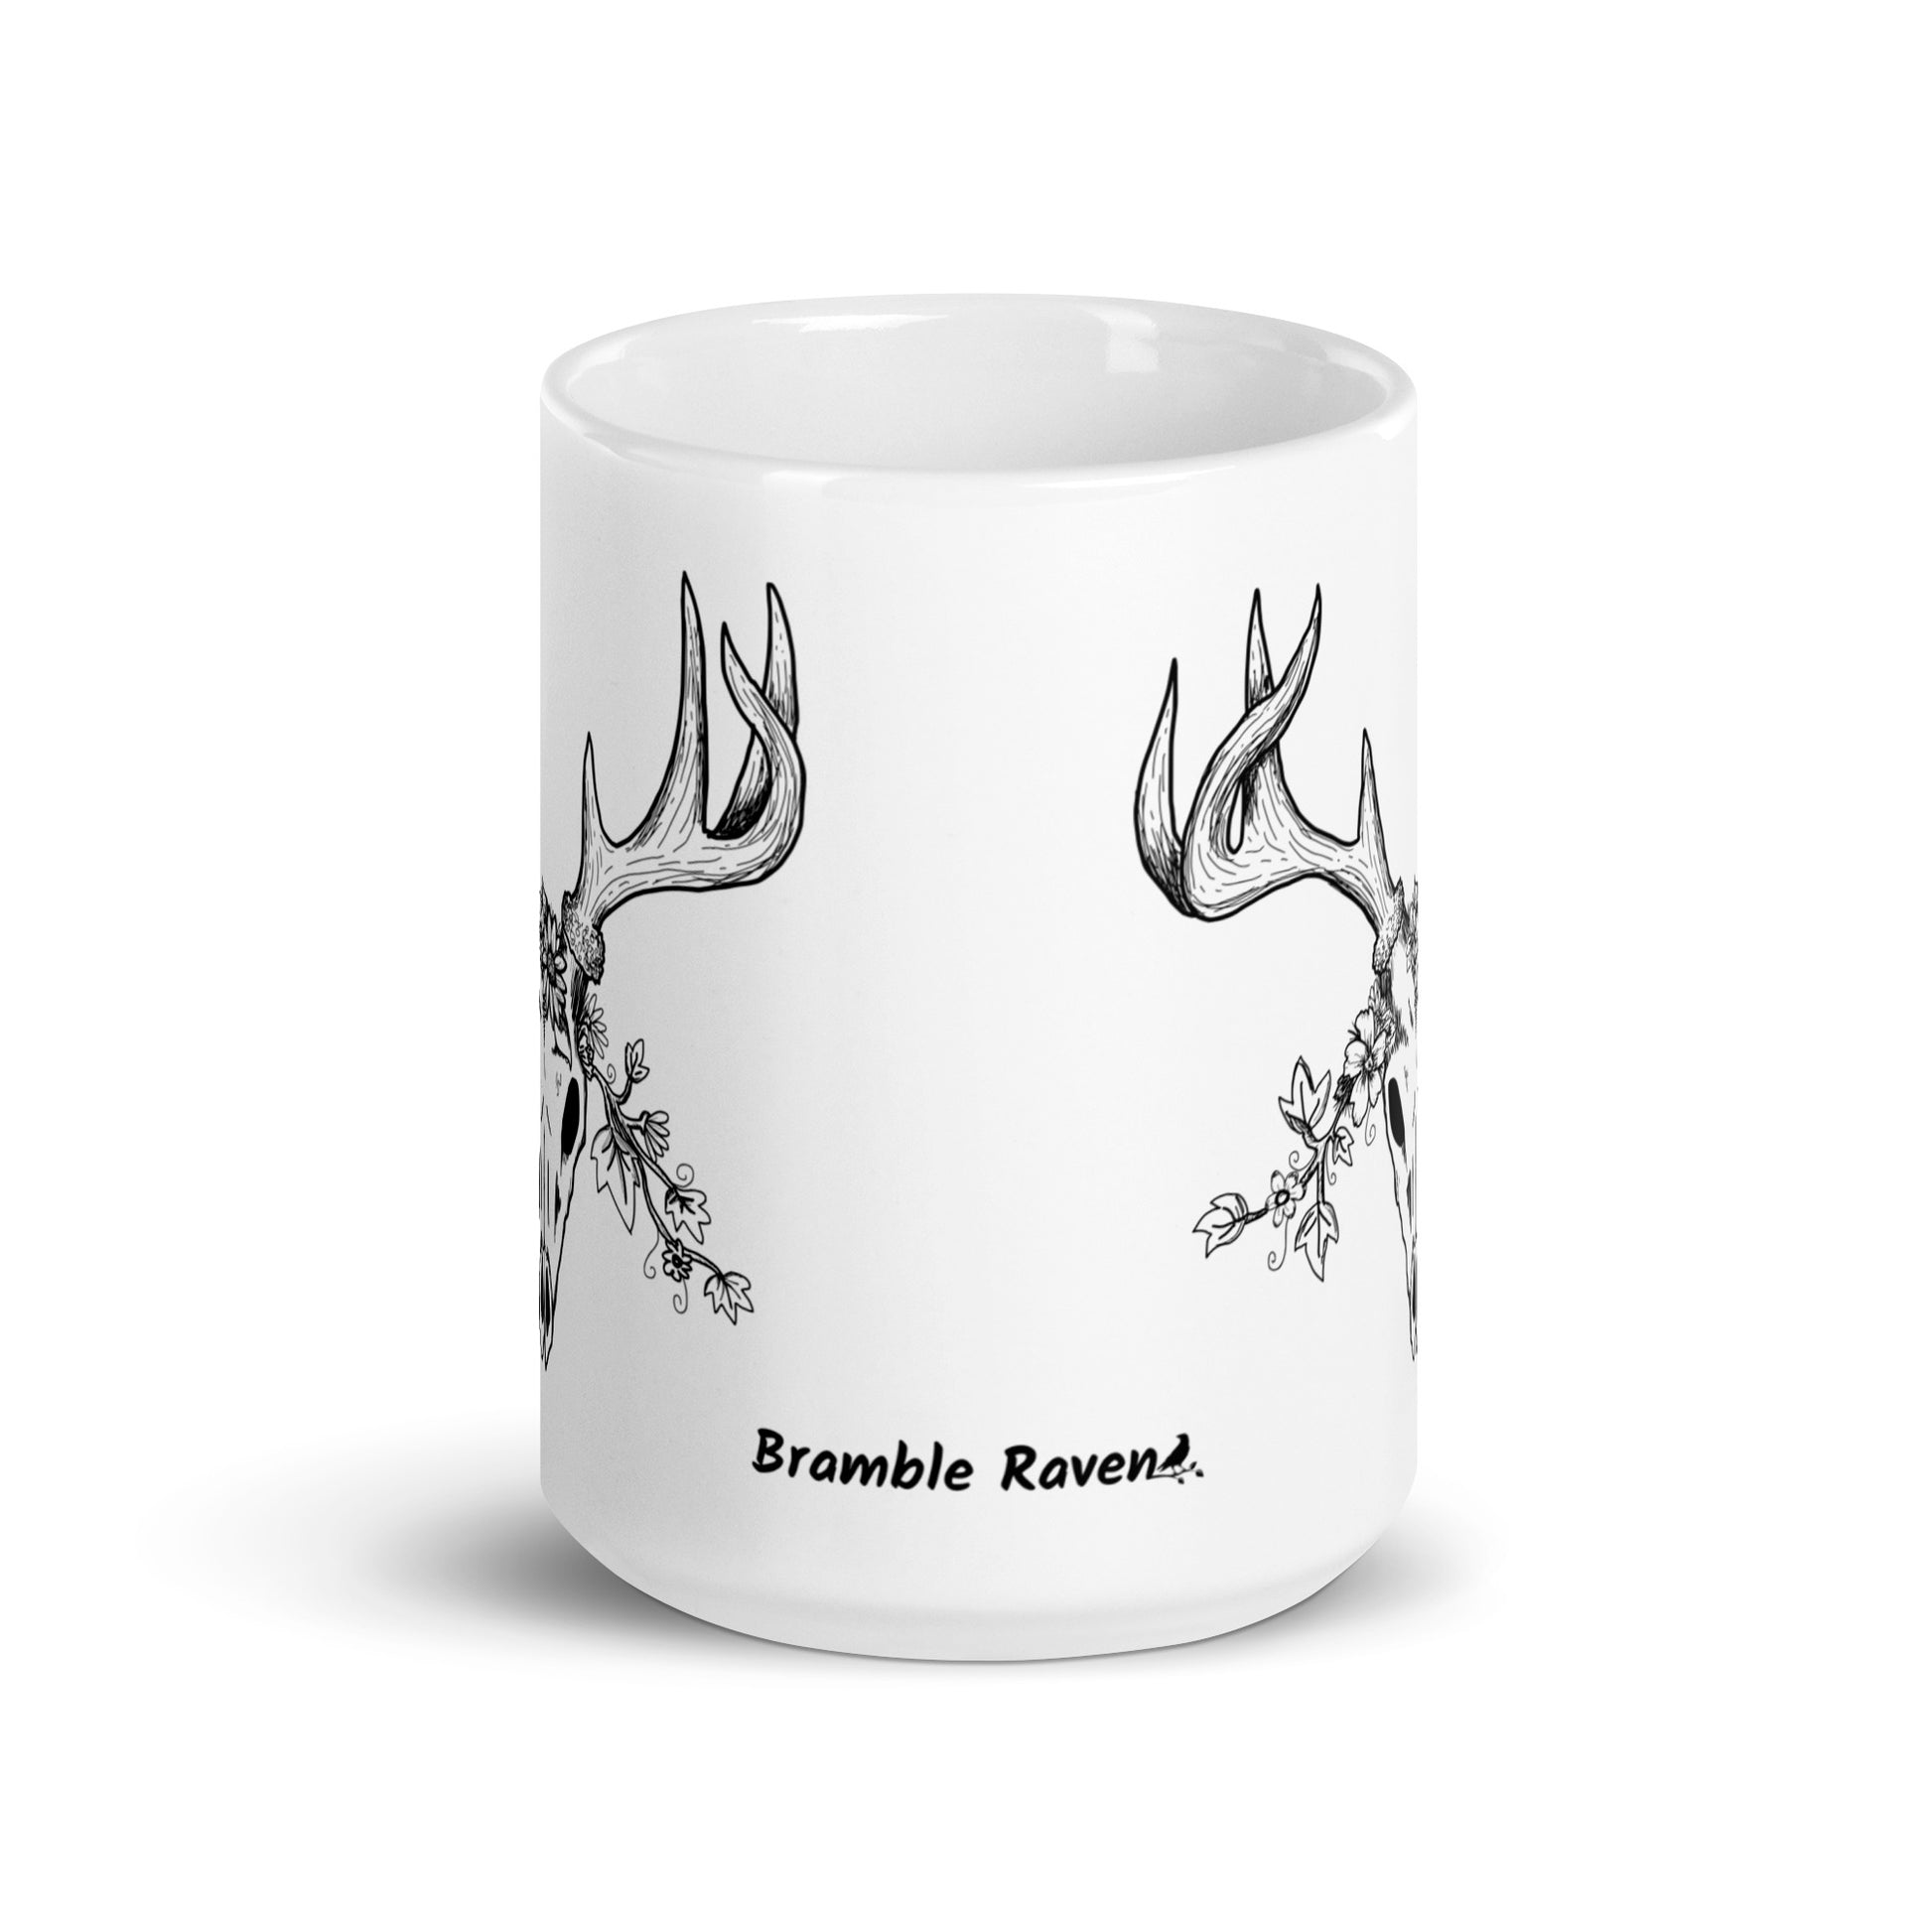 15 oz white ceramic mug. Features a double-sided hand illustrated image of a deer skull wreathed in flowers. Front view shows Bramble Raven logo.